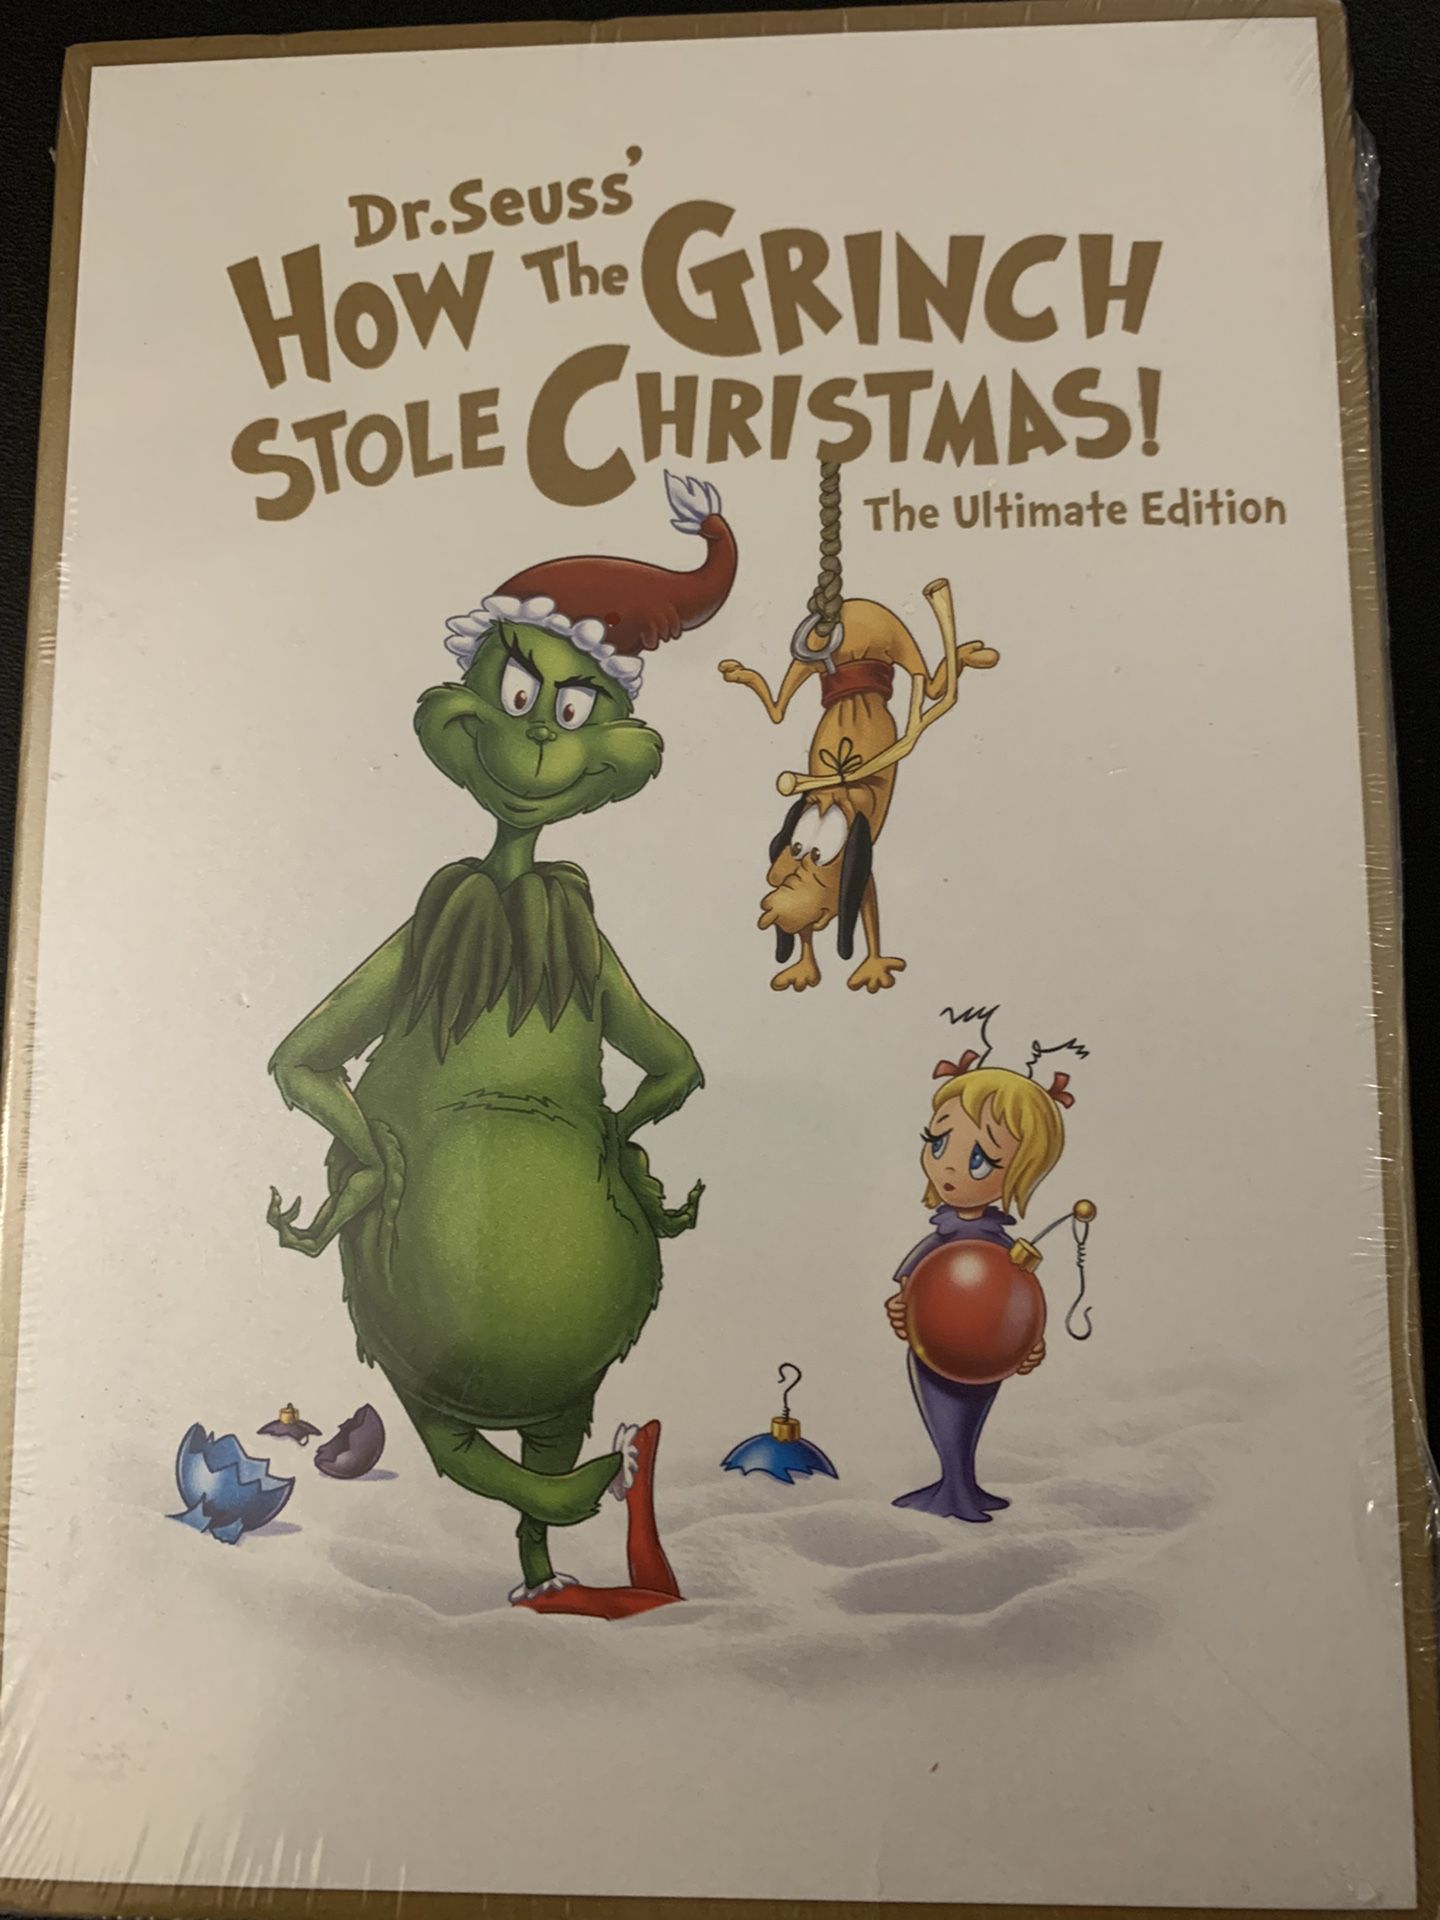 Dr. Seuss’ HOW The GRINCH STOLE CHRISTMAS! The Ultimate Edition (DVD) NEW!